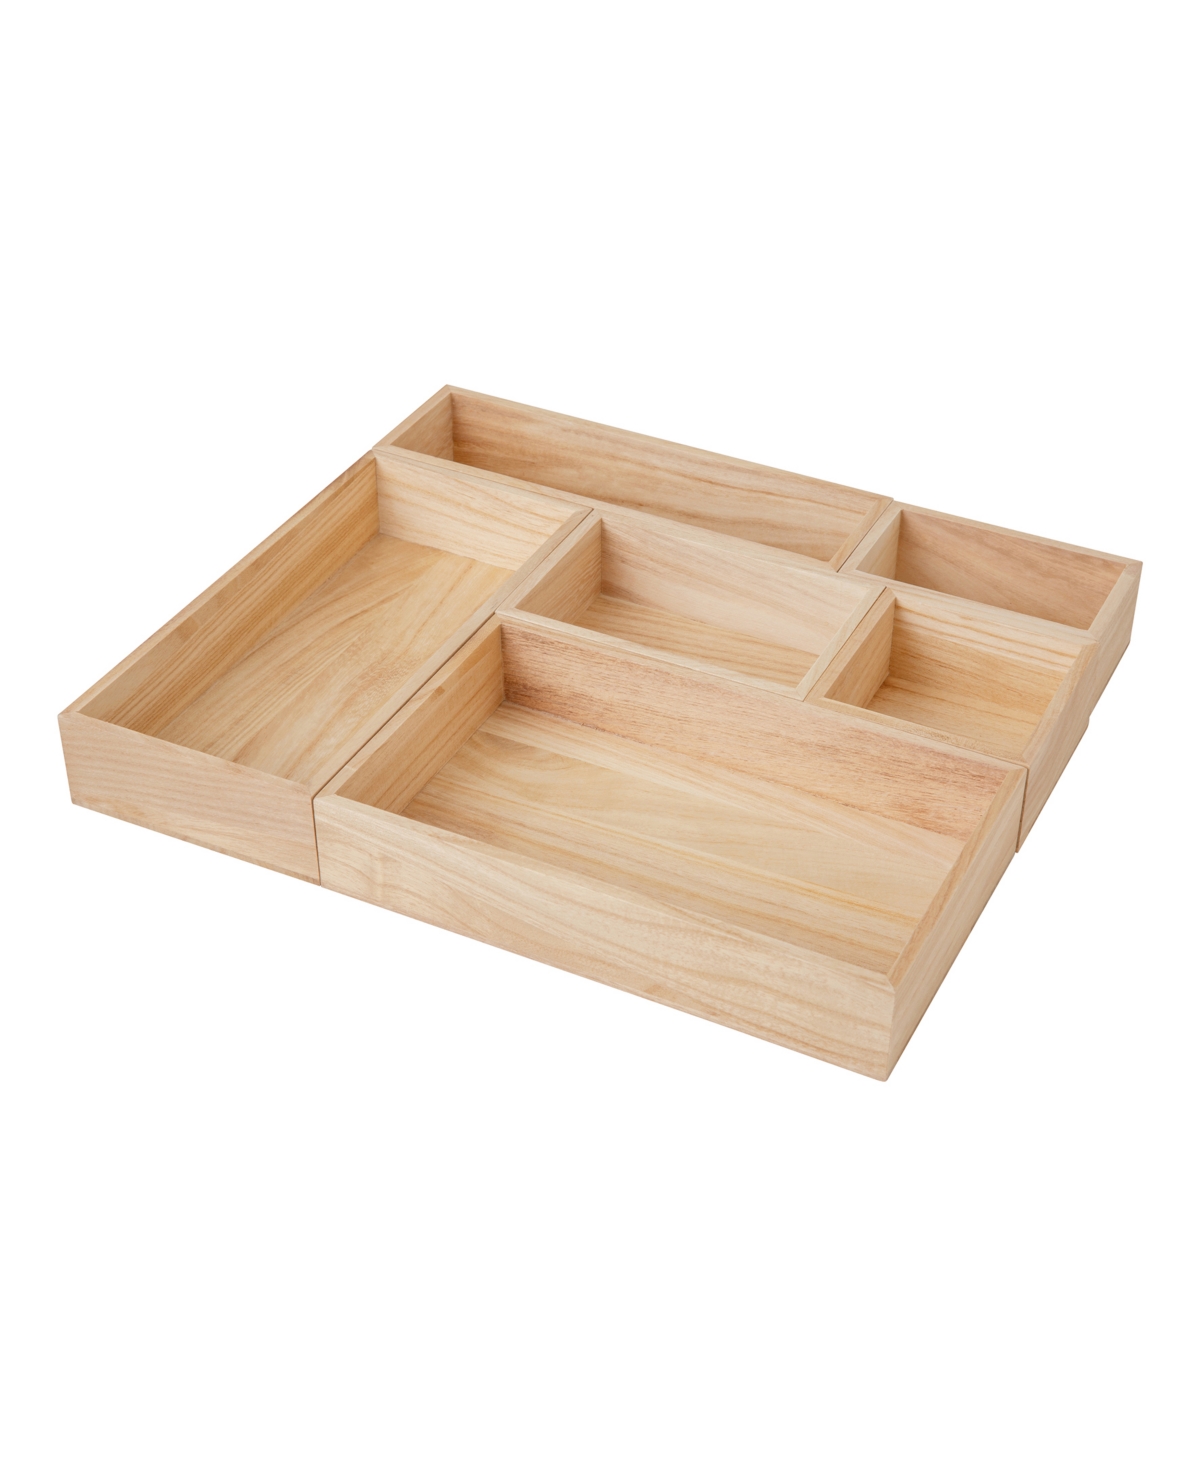 Enzo 6 Compartments Wooden Desk Drawer Organizer - Light Natural